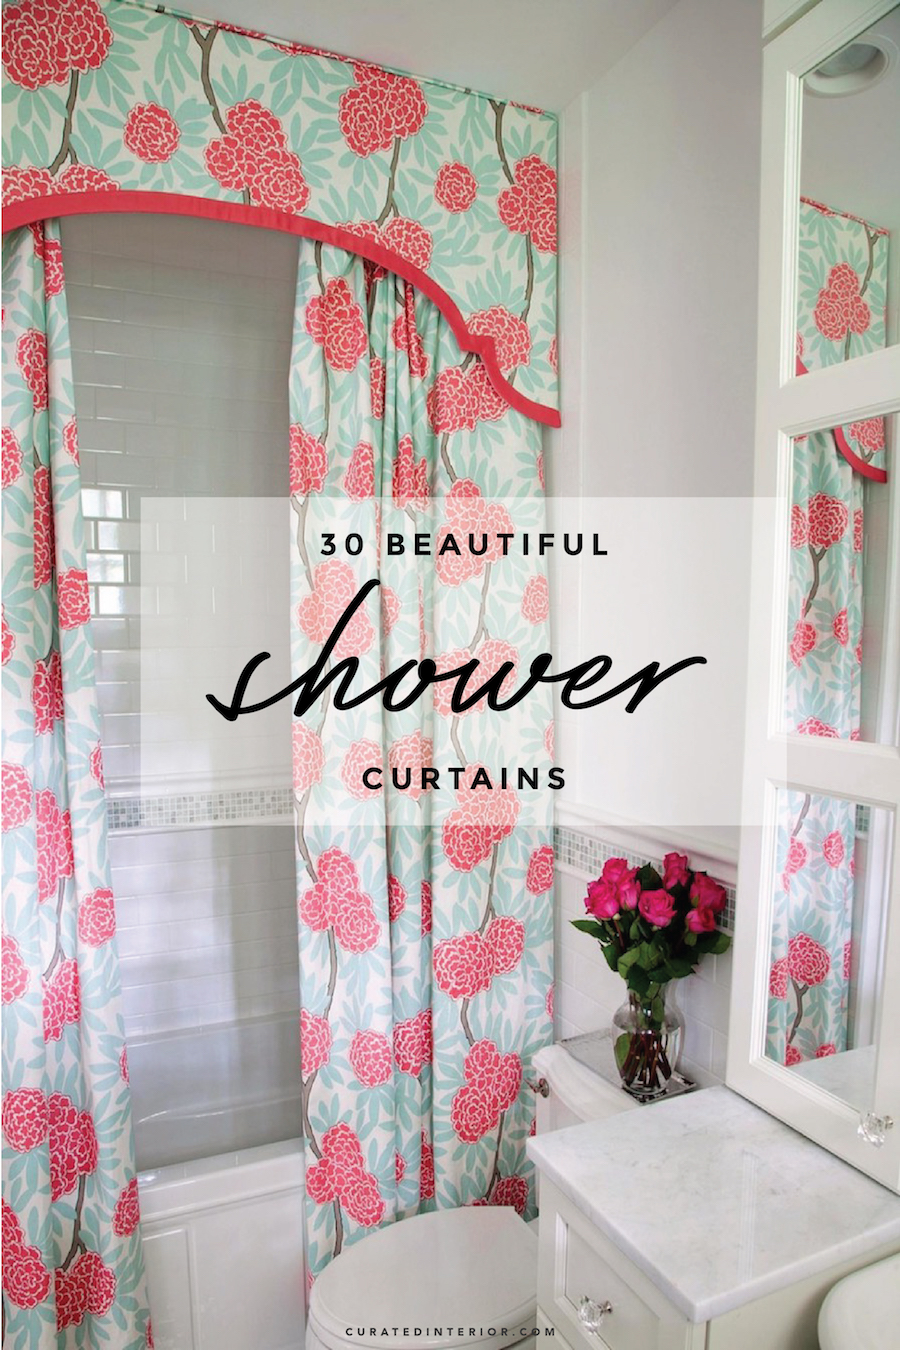 12 Beautiful Shower Curtains For Every, Beautiful Bathrooms With Shower Curtains